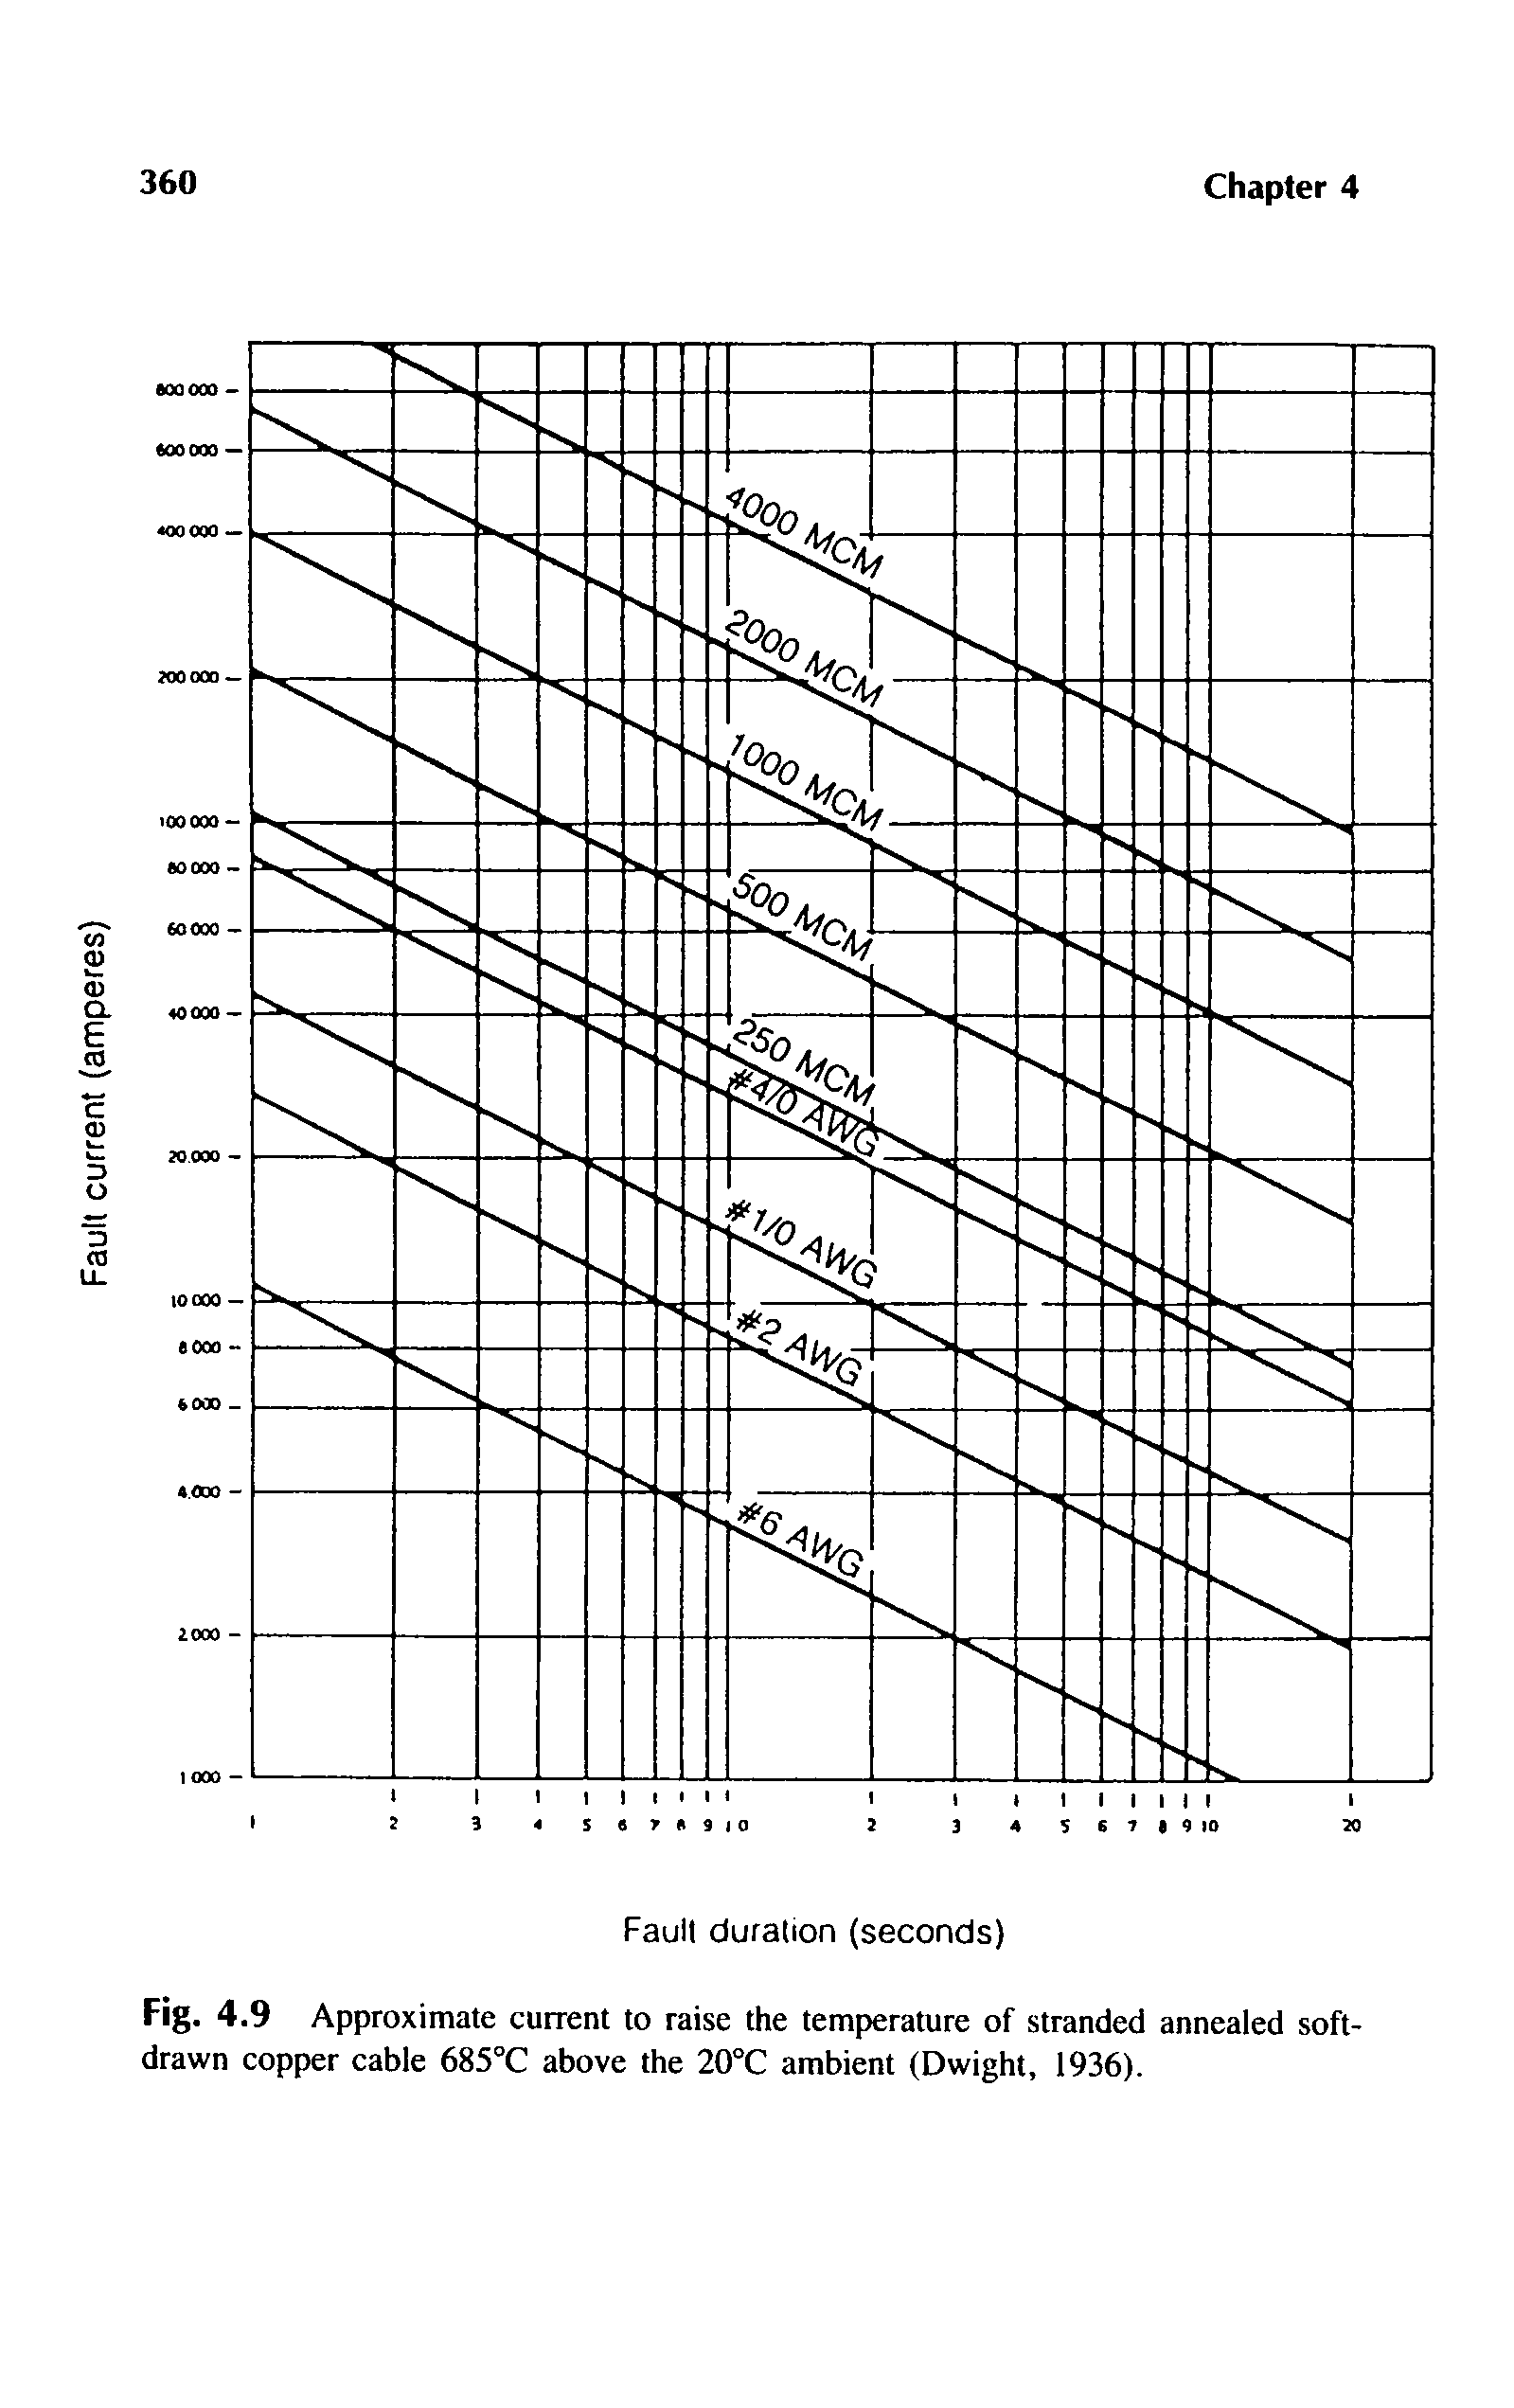 Fig. 4.9 Approximate current to raise the temperature of stranded annealed soft-drawn copper cable 685°C above the 20°C ambient (Dwight, 1936).